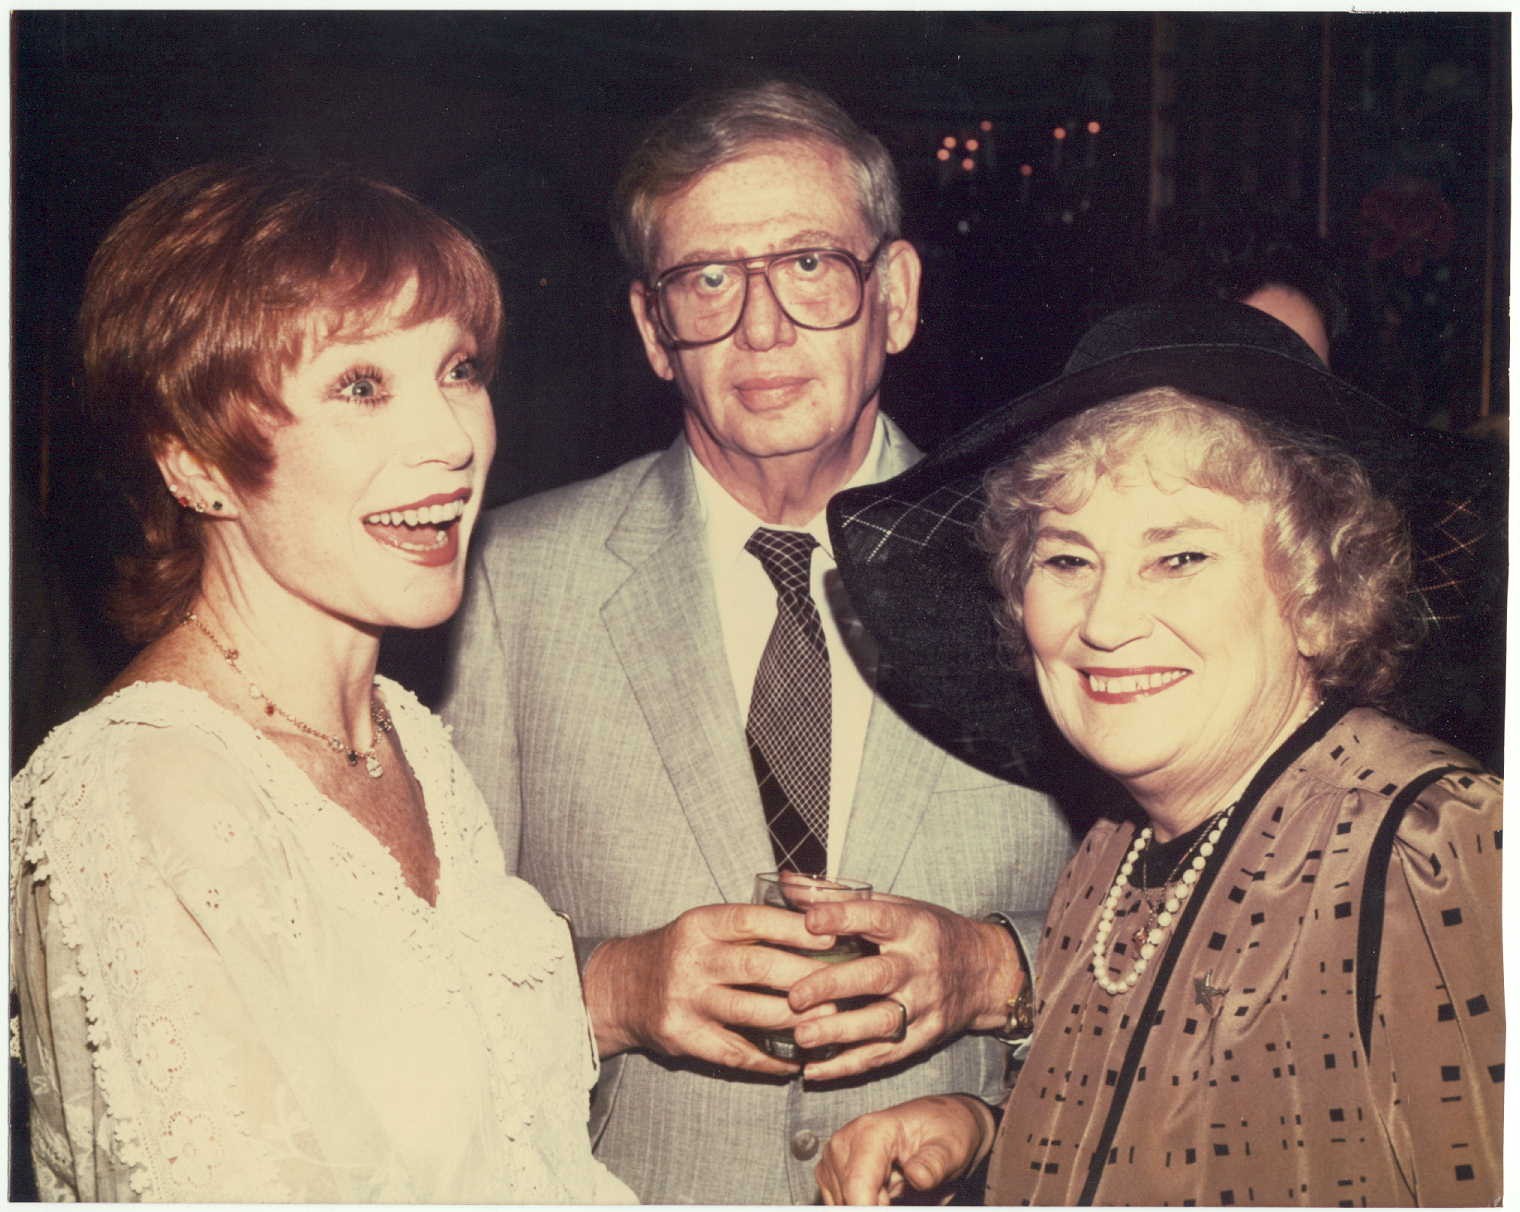 Shirley MacLaine with Bill Nuchow (Bob Nuchow's father), Bella Abzug on George McGovern presidential campaign trail